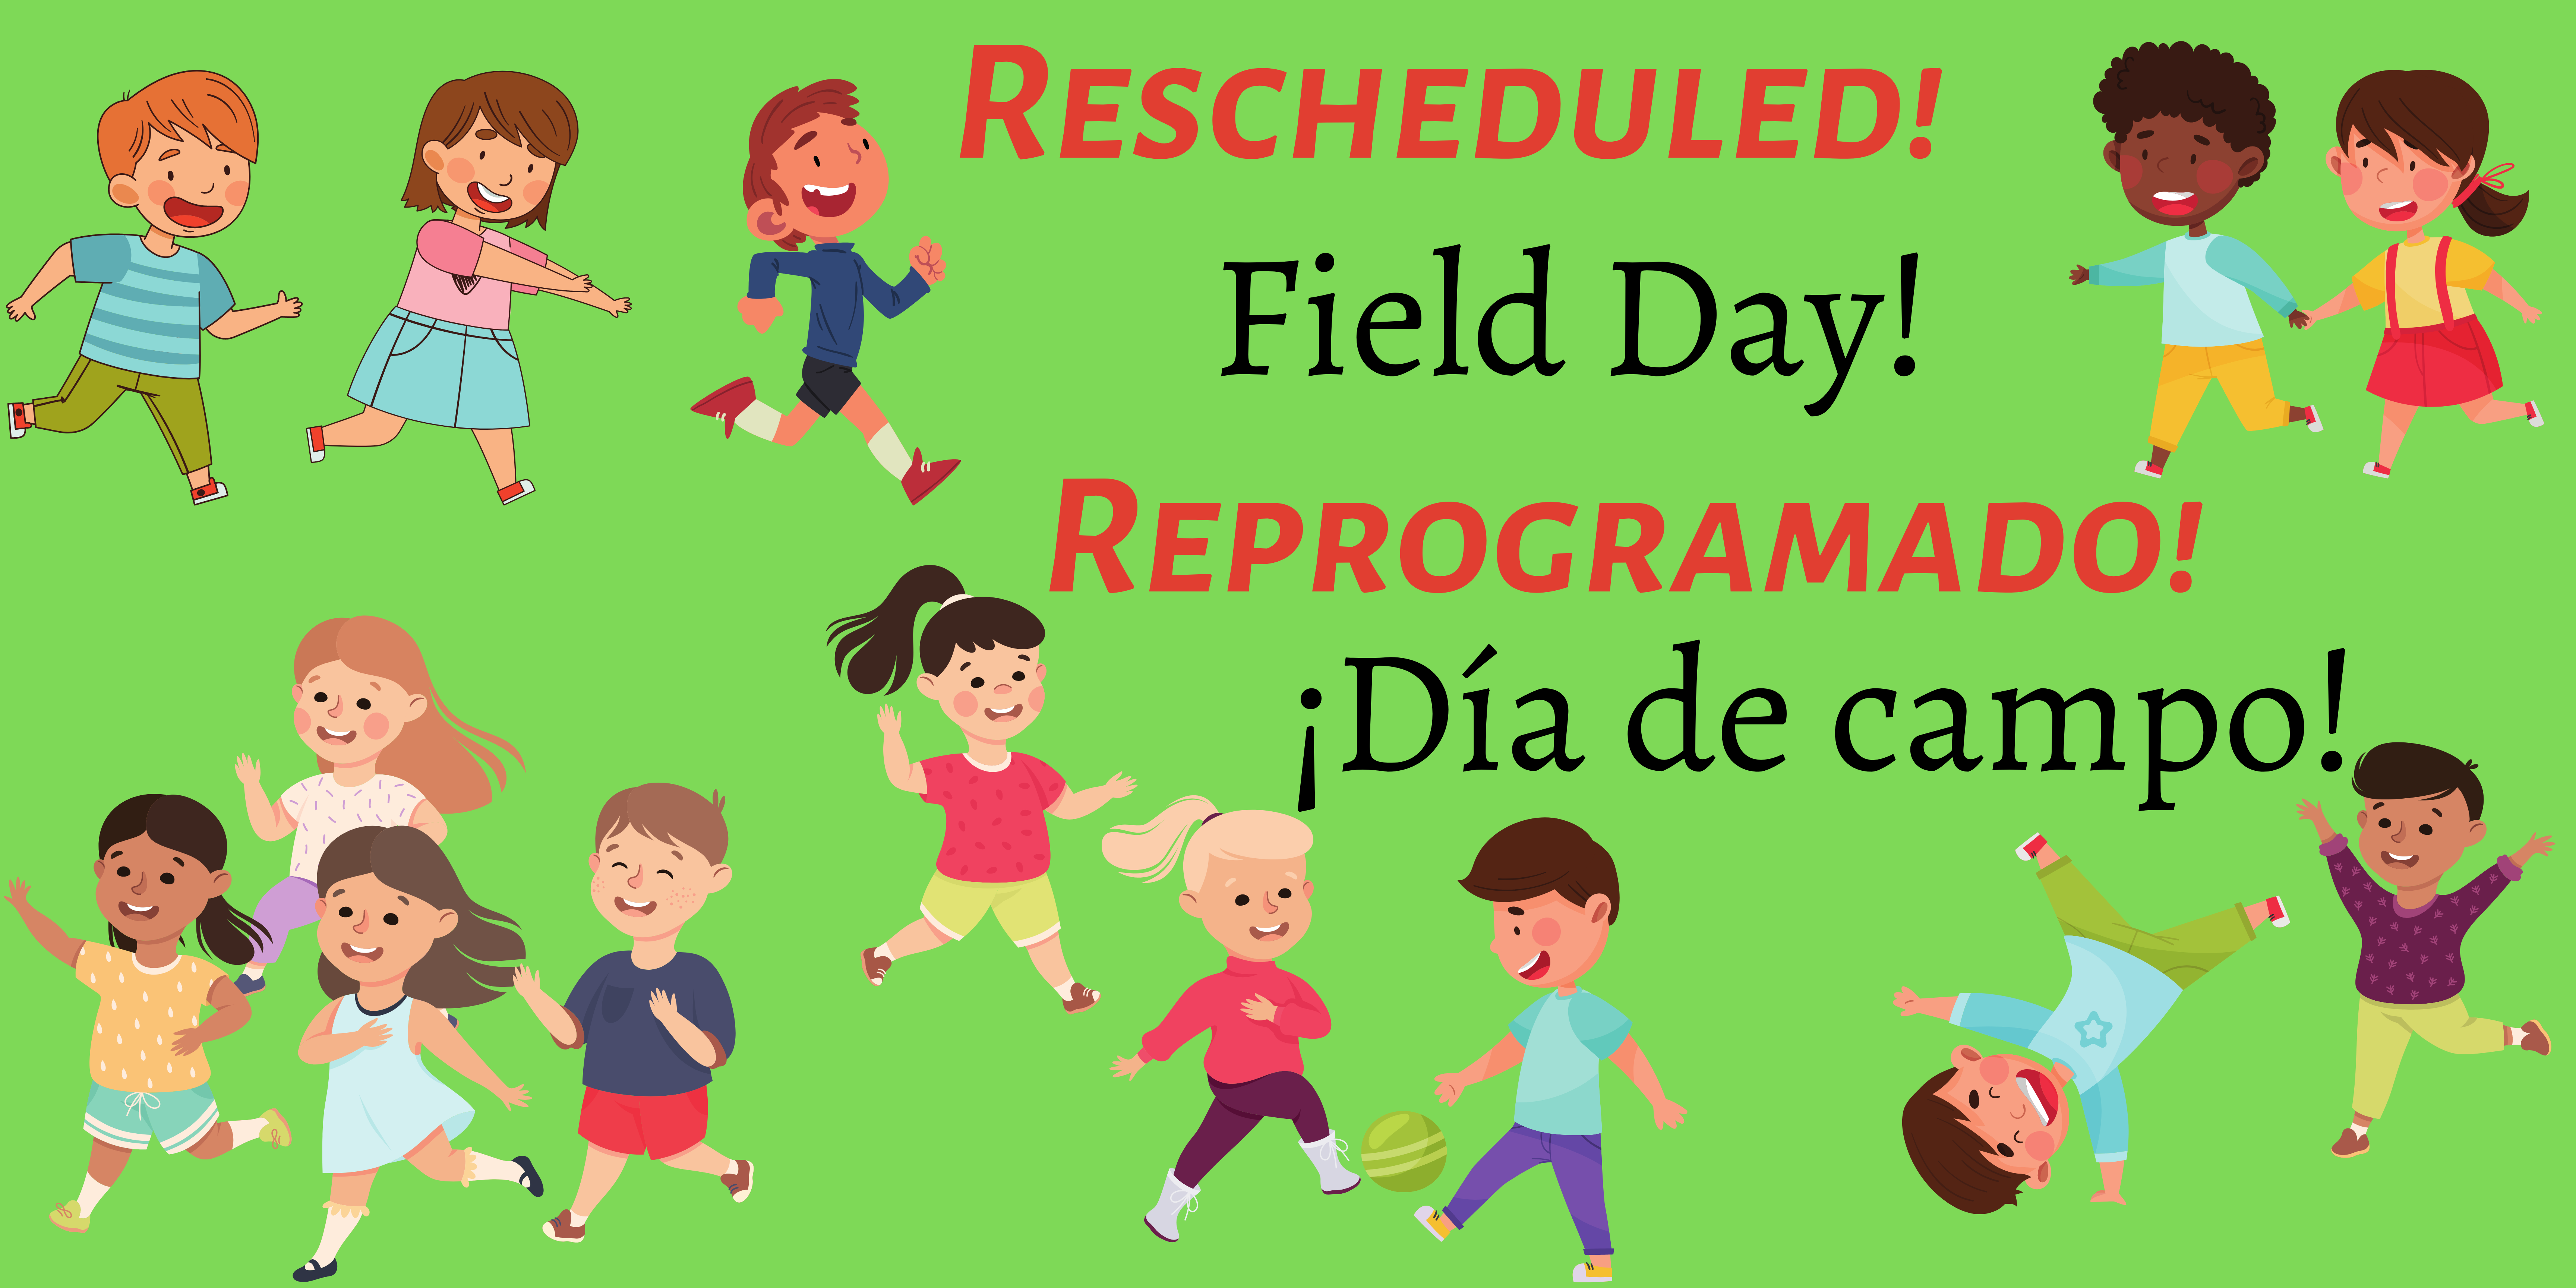 Green background with children running and playing and text, "Rescheduled! Field Day!" and "Reprogramado Día de campo!"